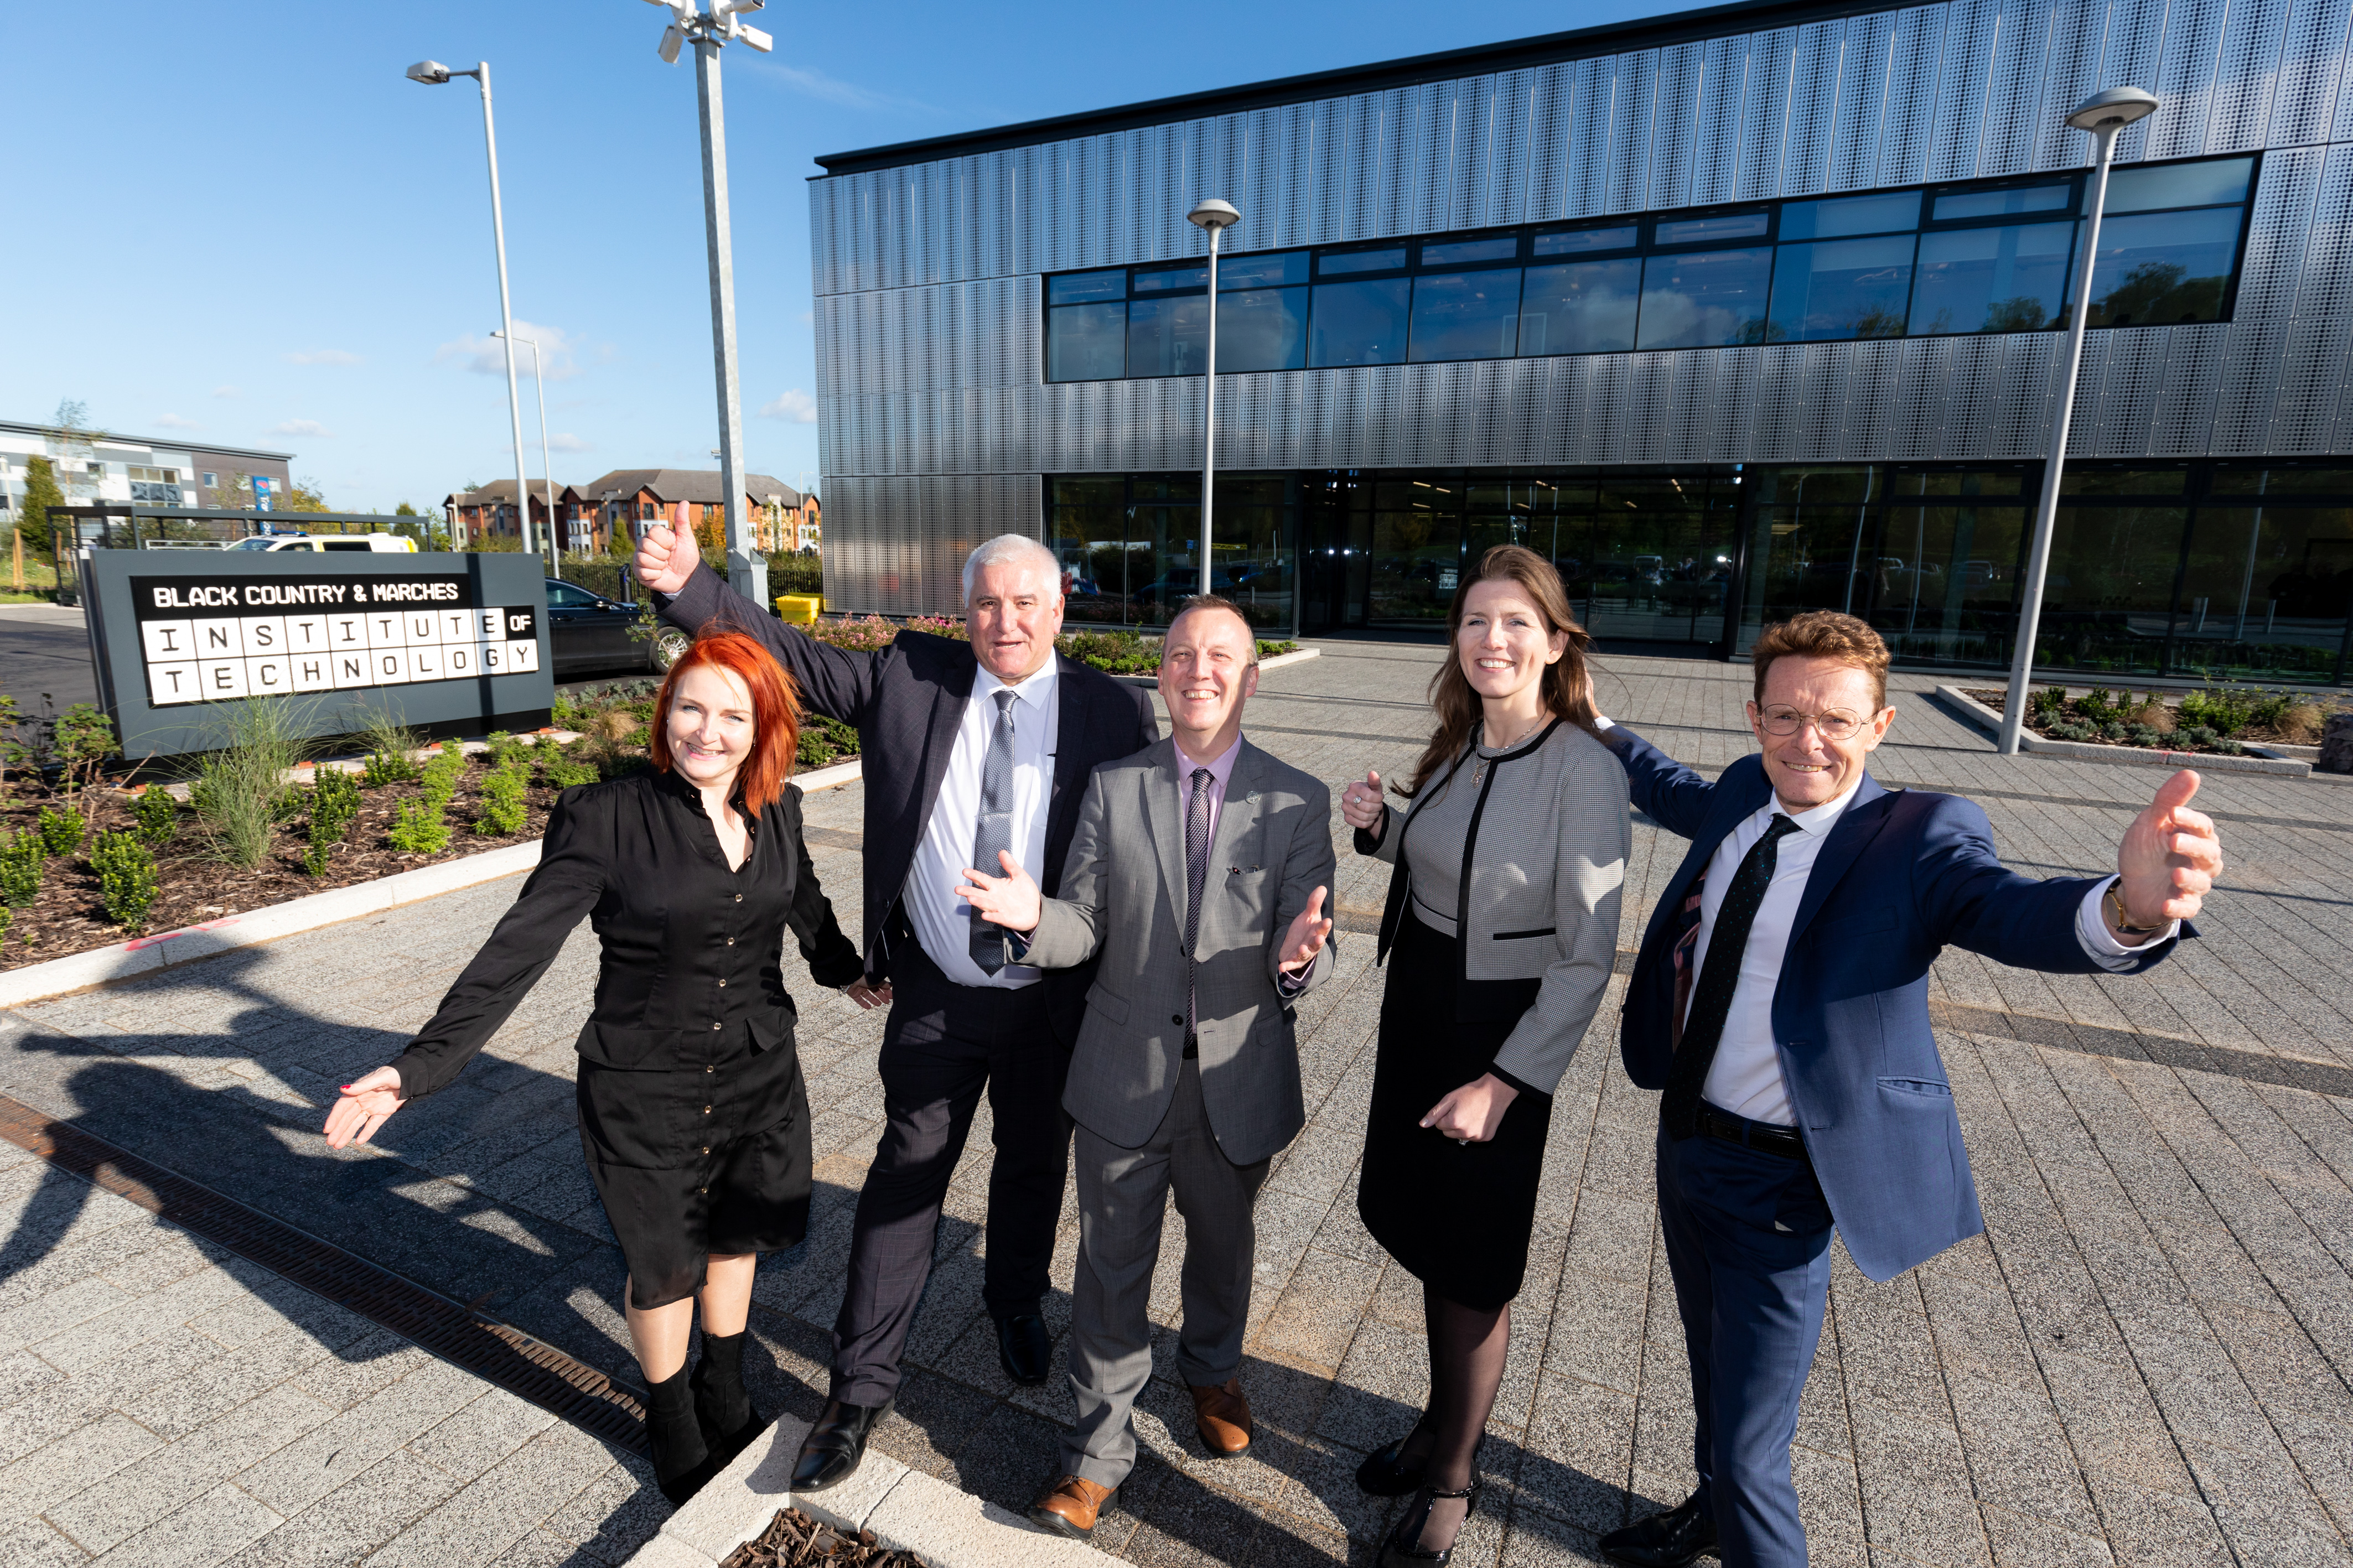 From left: Julie Nugent, WMCA director of productivity and skills, Cllr Patrick Harley, leader of Dudley Council, Neil Thomas, principal and chief executive of Dudley College of Technology, Michelle Donelan, Minister of State for Higher and Further Education and Andy Street, Mayor of the West Midlands and chair of the WMCA